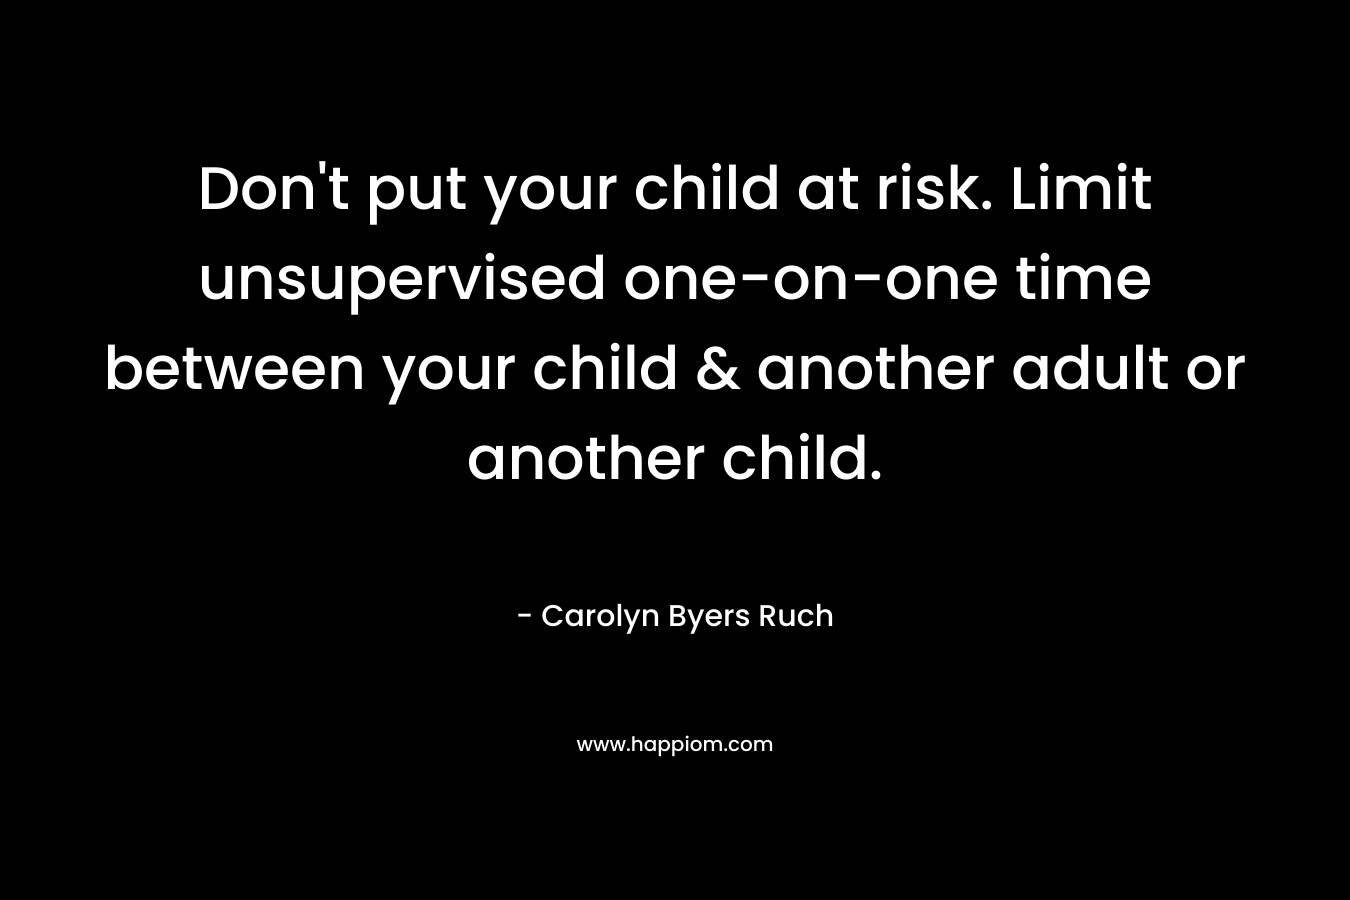 Don't put your child at risk. Limit unsupervised one-on-one time between your child & another adult or another child.